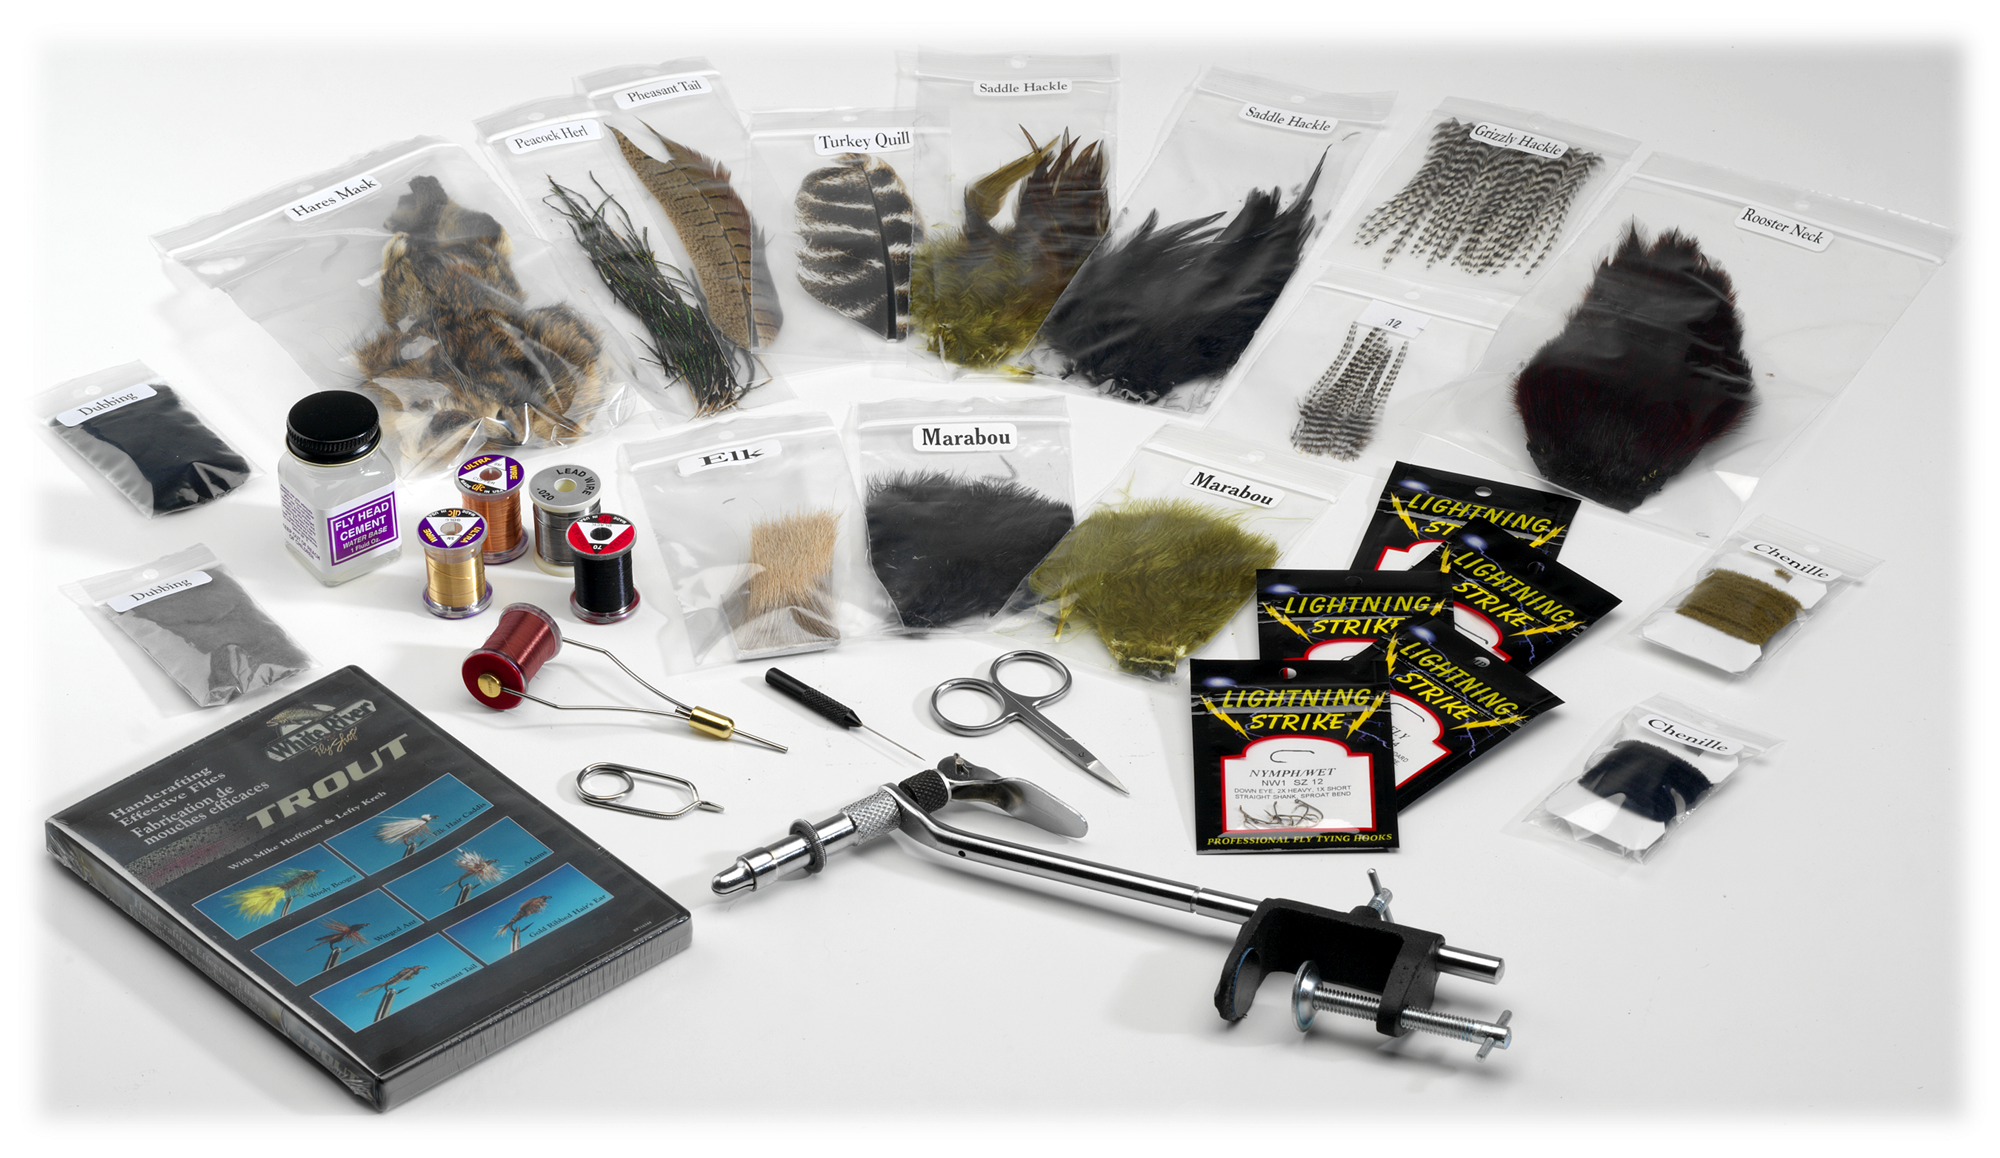 White River Fly Shop Deluxe Fly Tying Kit - Trout Tying